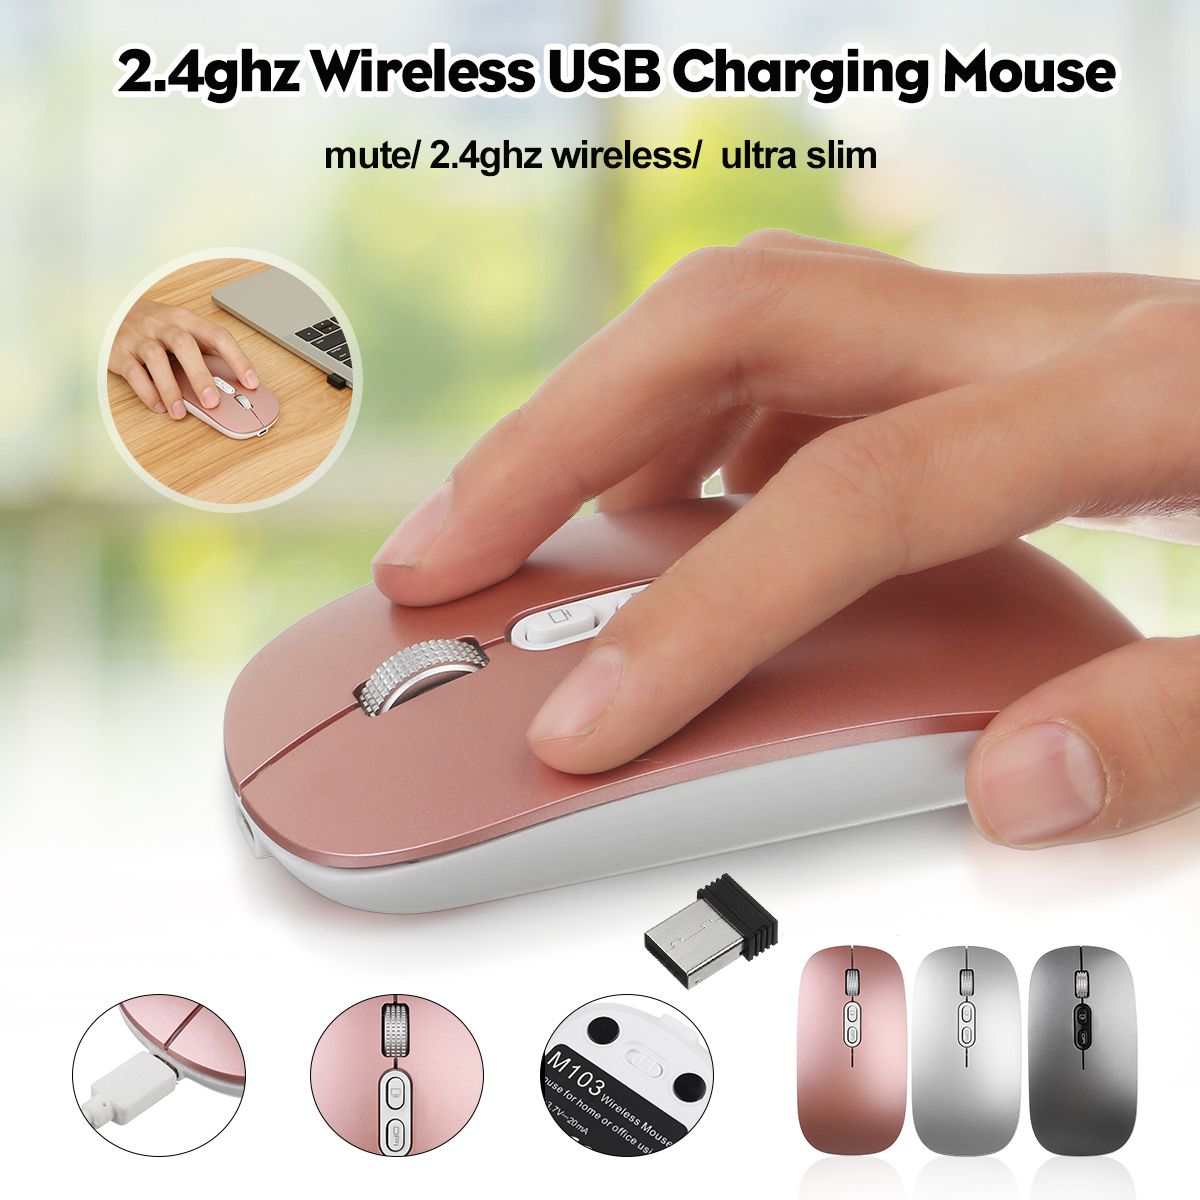 24-GHZ-80012001600-DPI-Wireless-USB-Charging-Ultra-thin-Office-Mouse-for-PC-Laptop-1575728